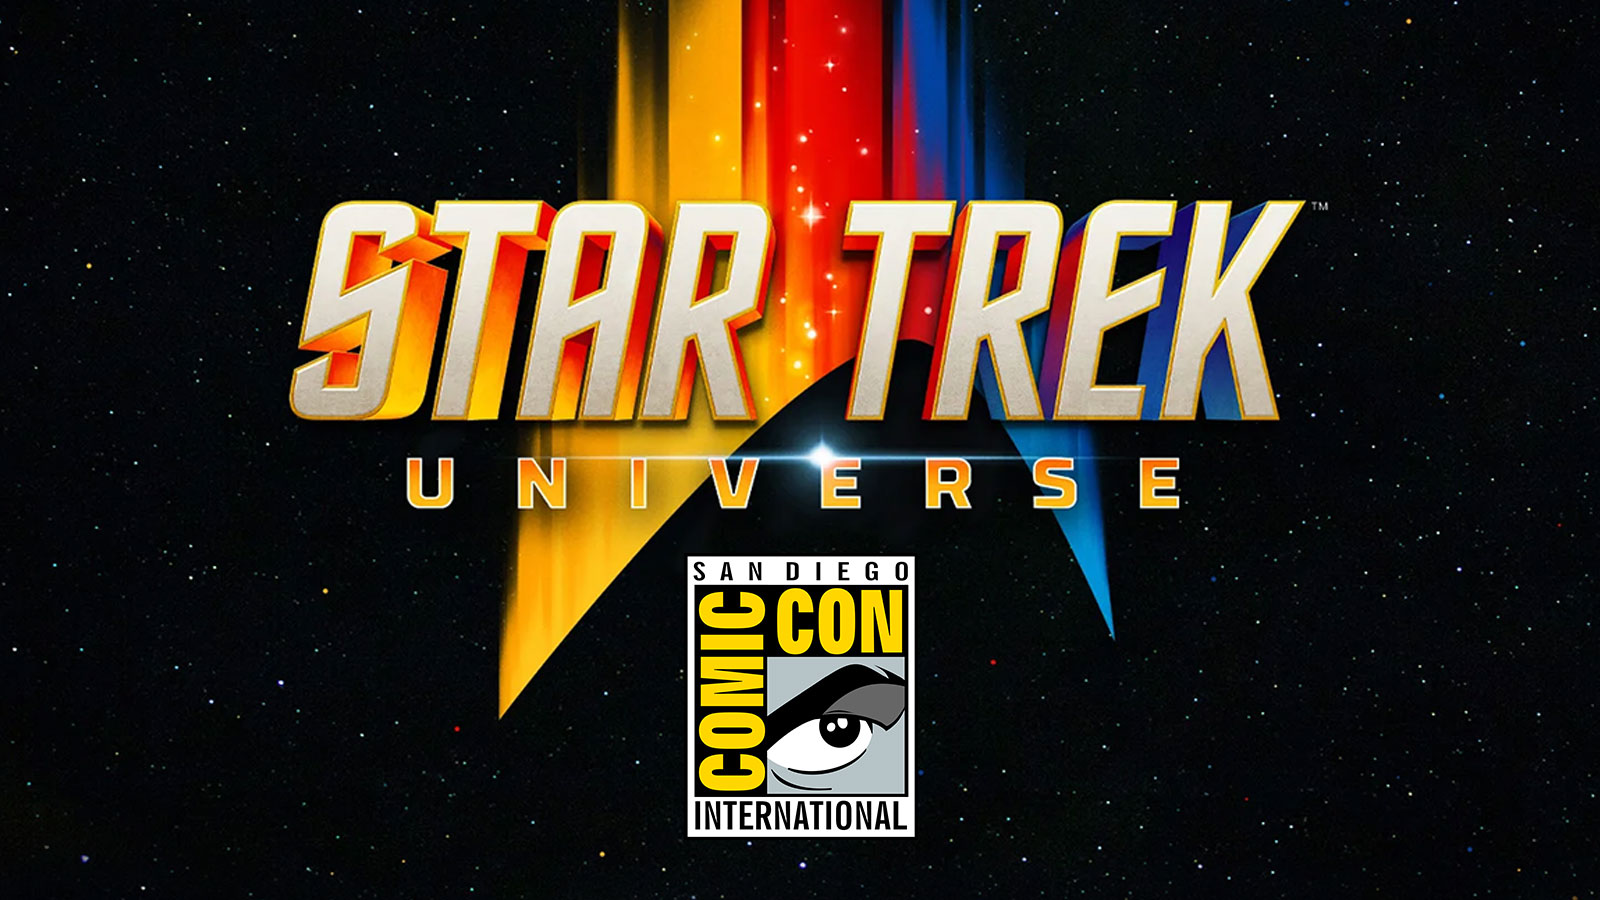 Star Trek Universe beams into San Diego Comic-Con with Strange New Worlds, Picard, Lower Decks + more